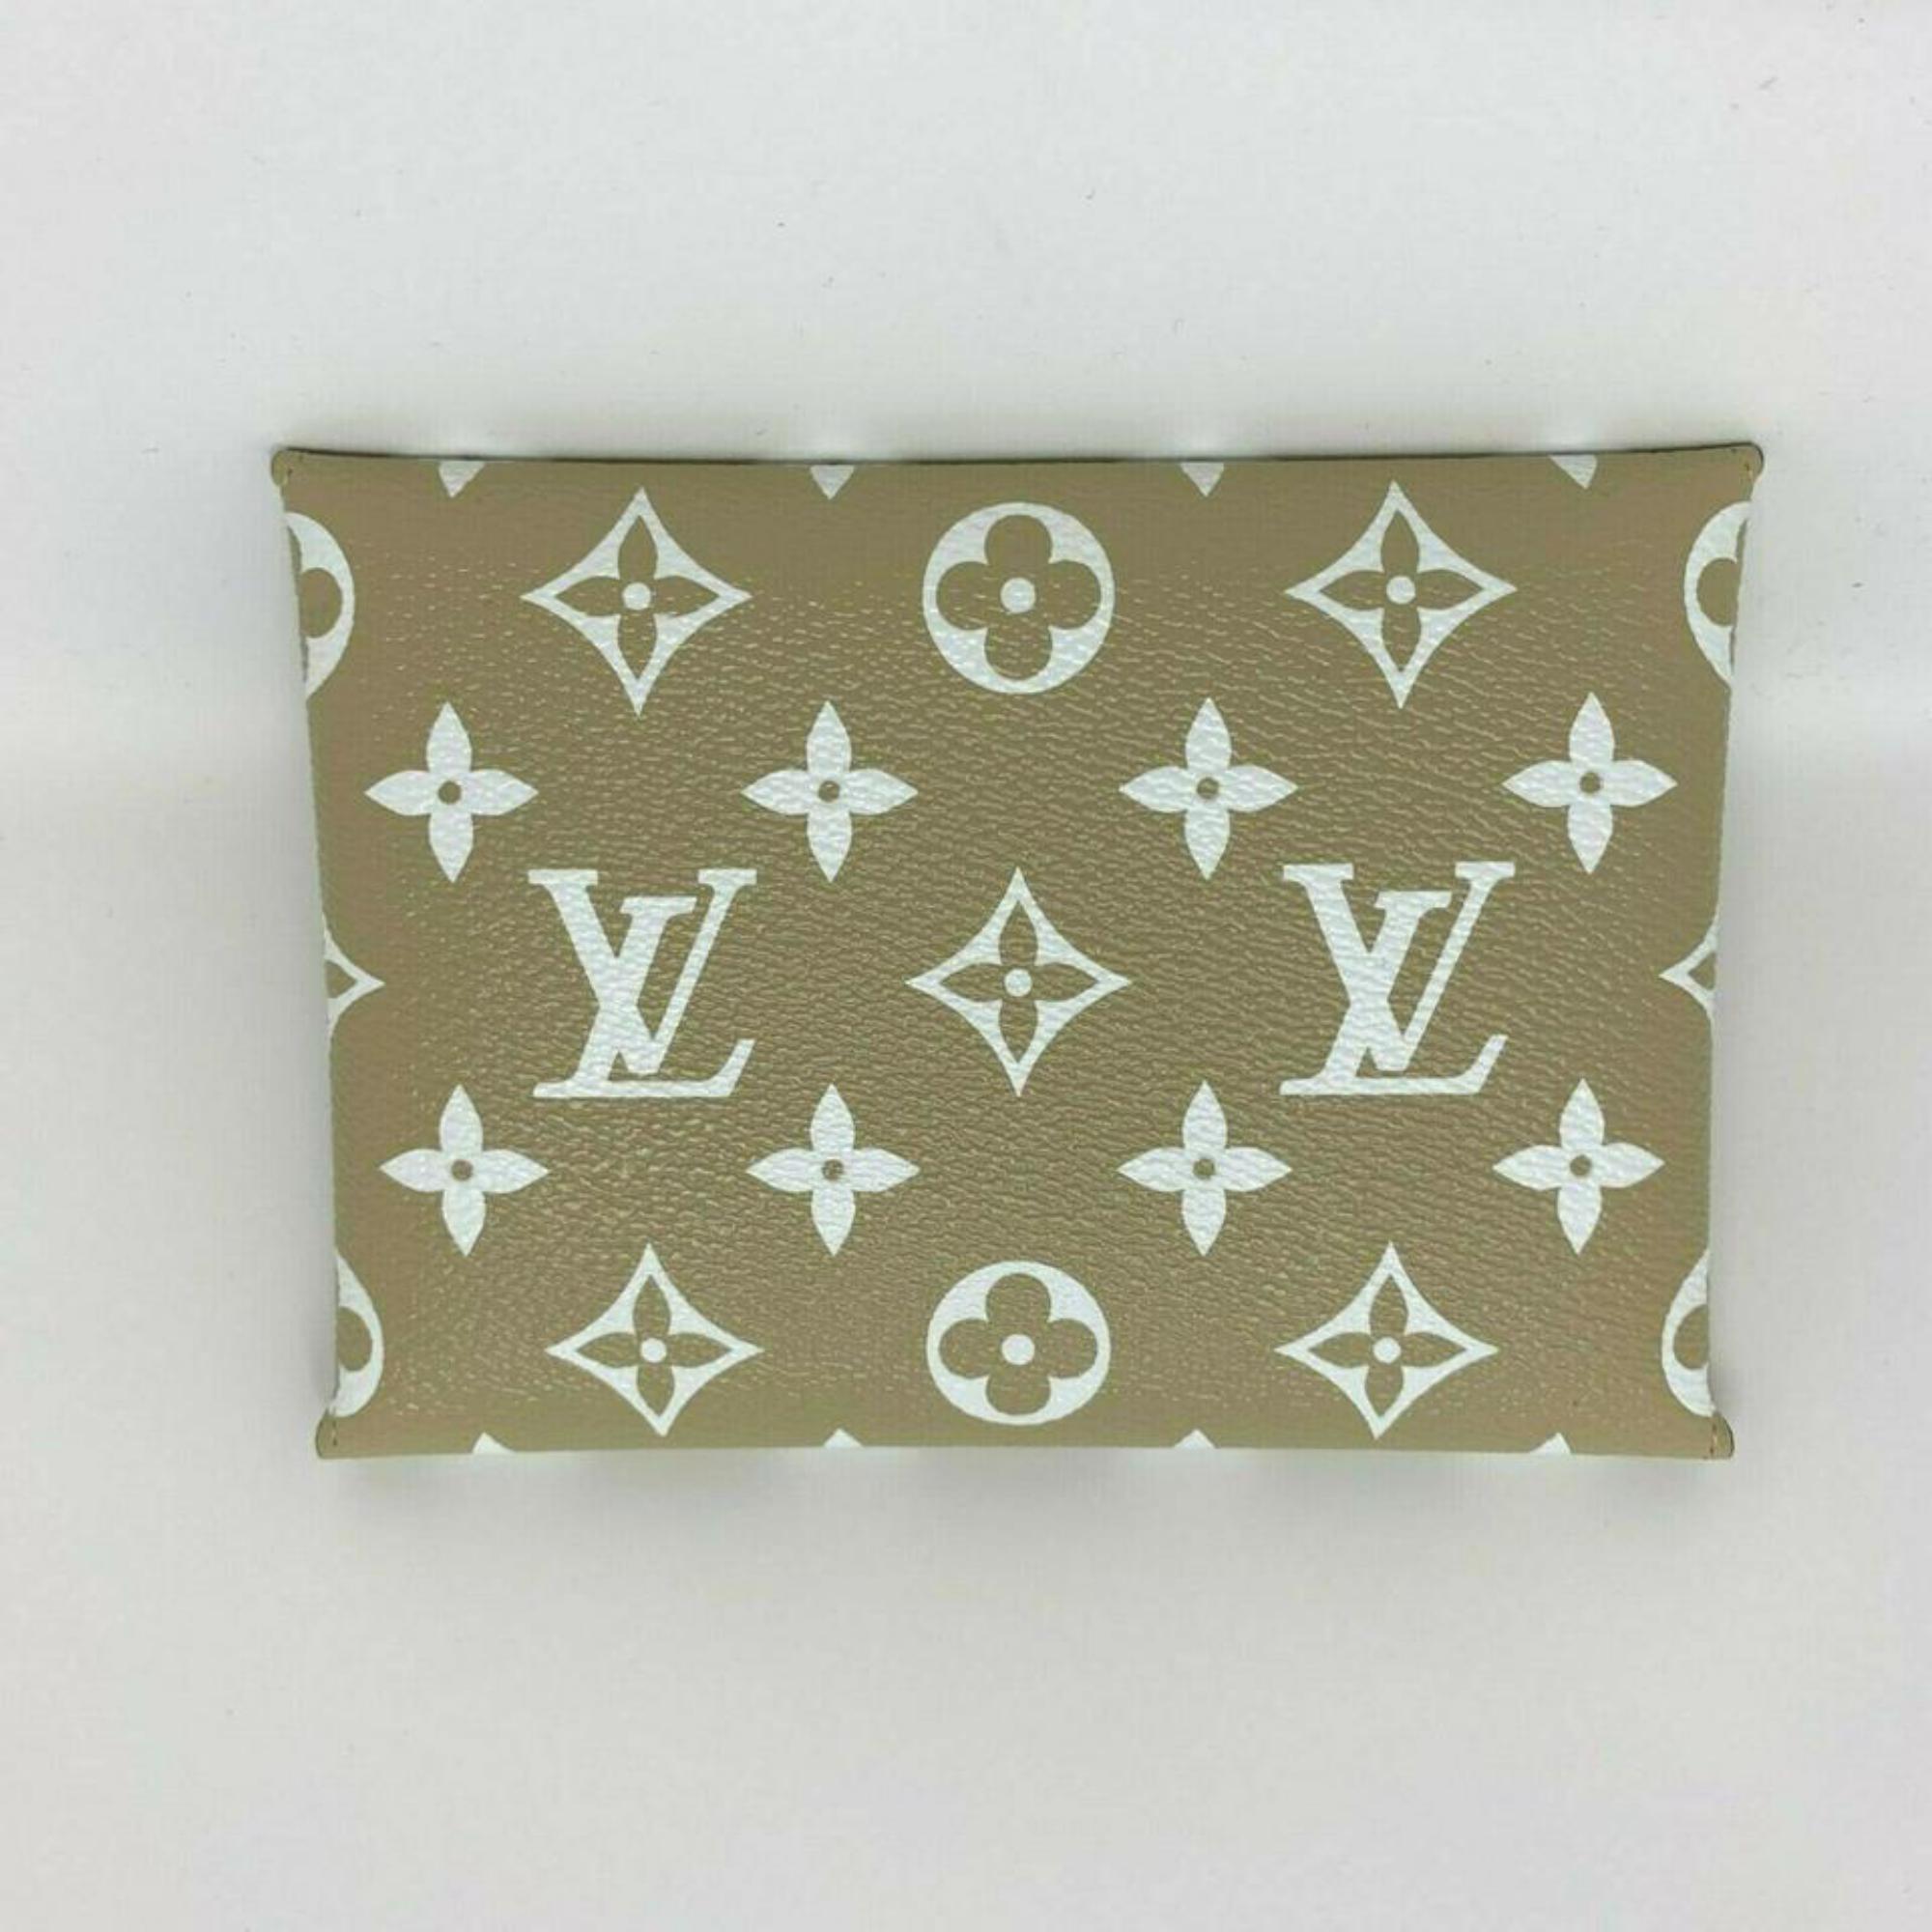 Louis Vuitton Beige Medium Ss19 Limited Edition Giant Kirigami Pouch 870619  For Sale 4